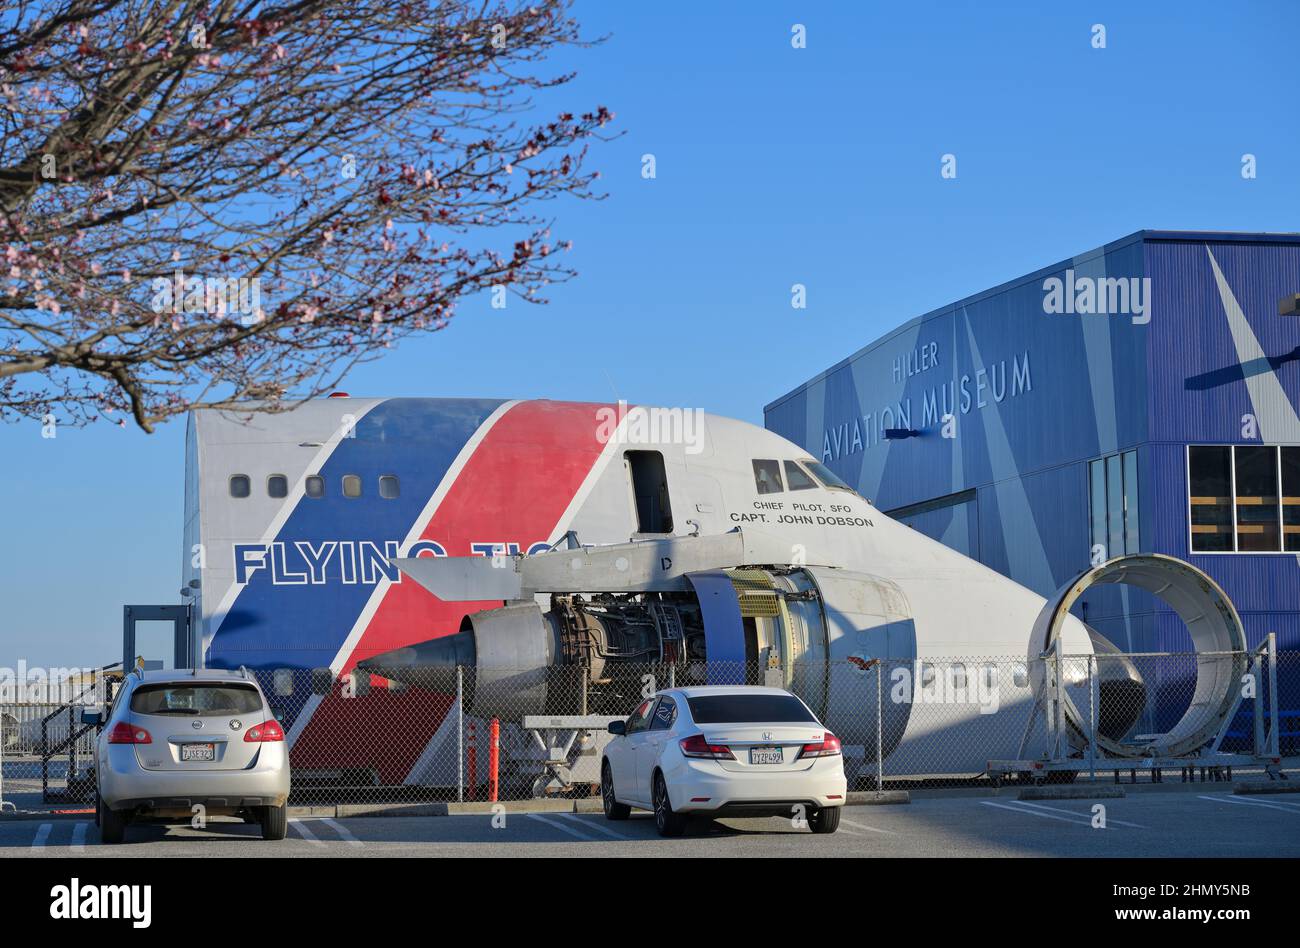 Page 5 - Venue Parking High Resolution Stock Photography and Images - Alamy